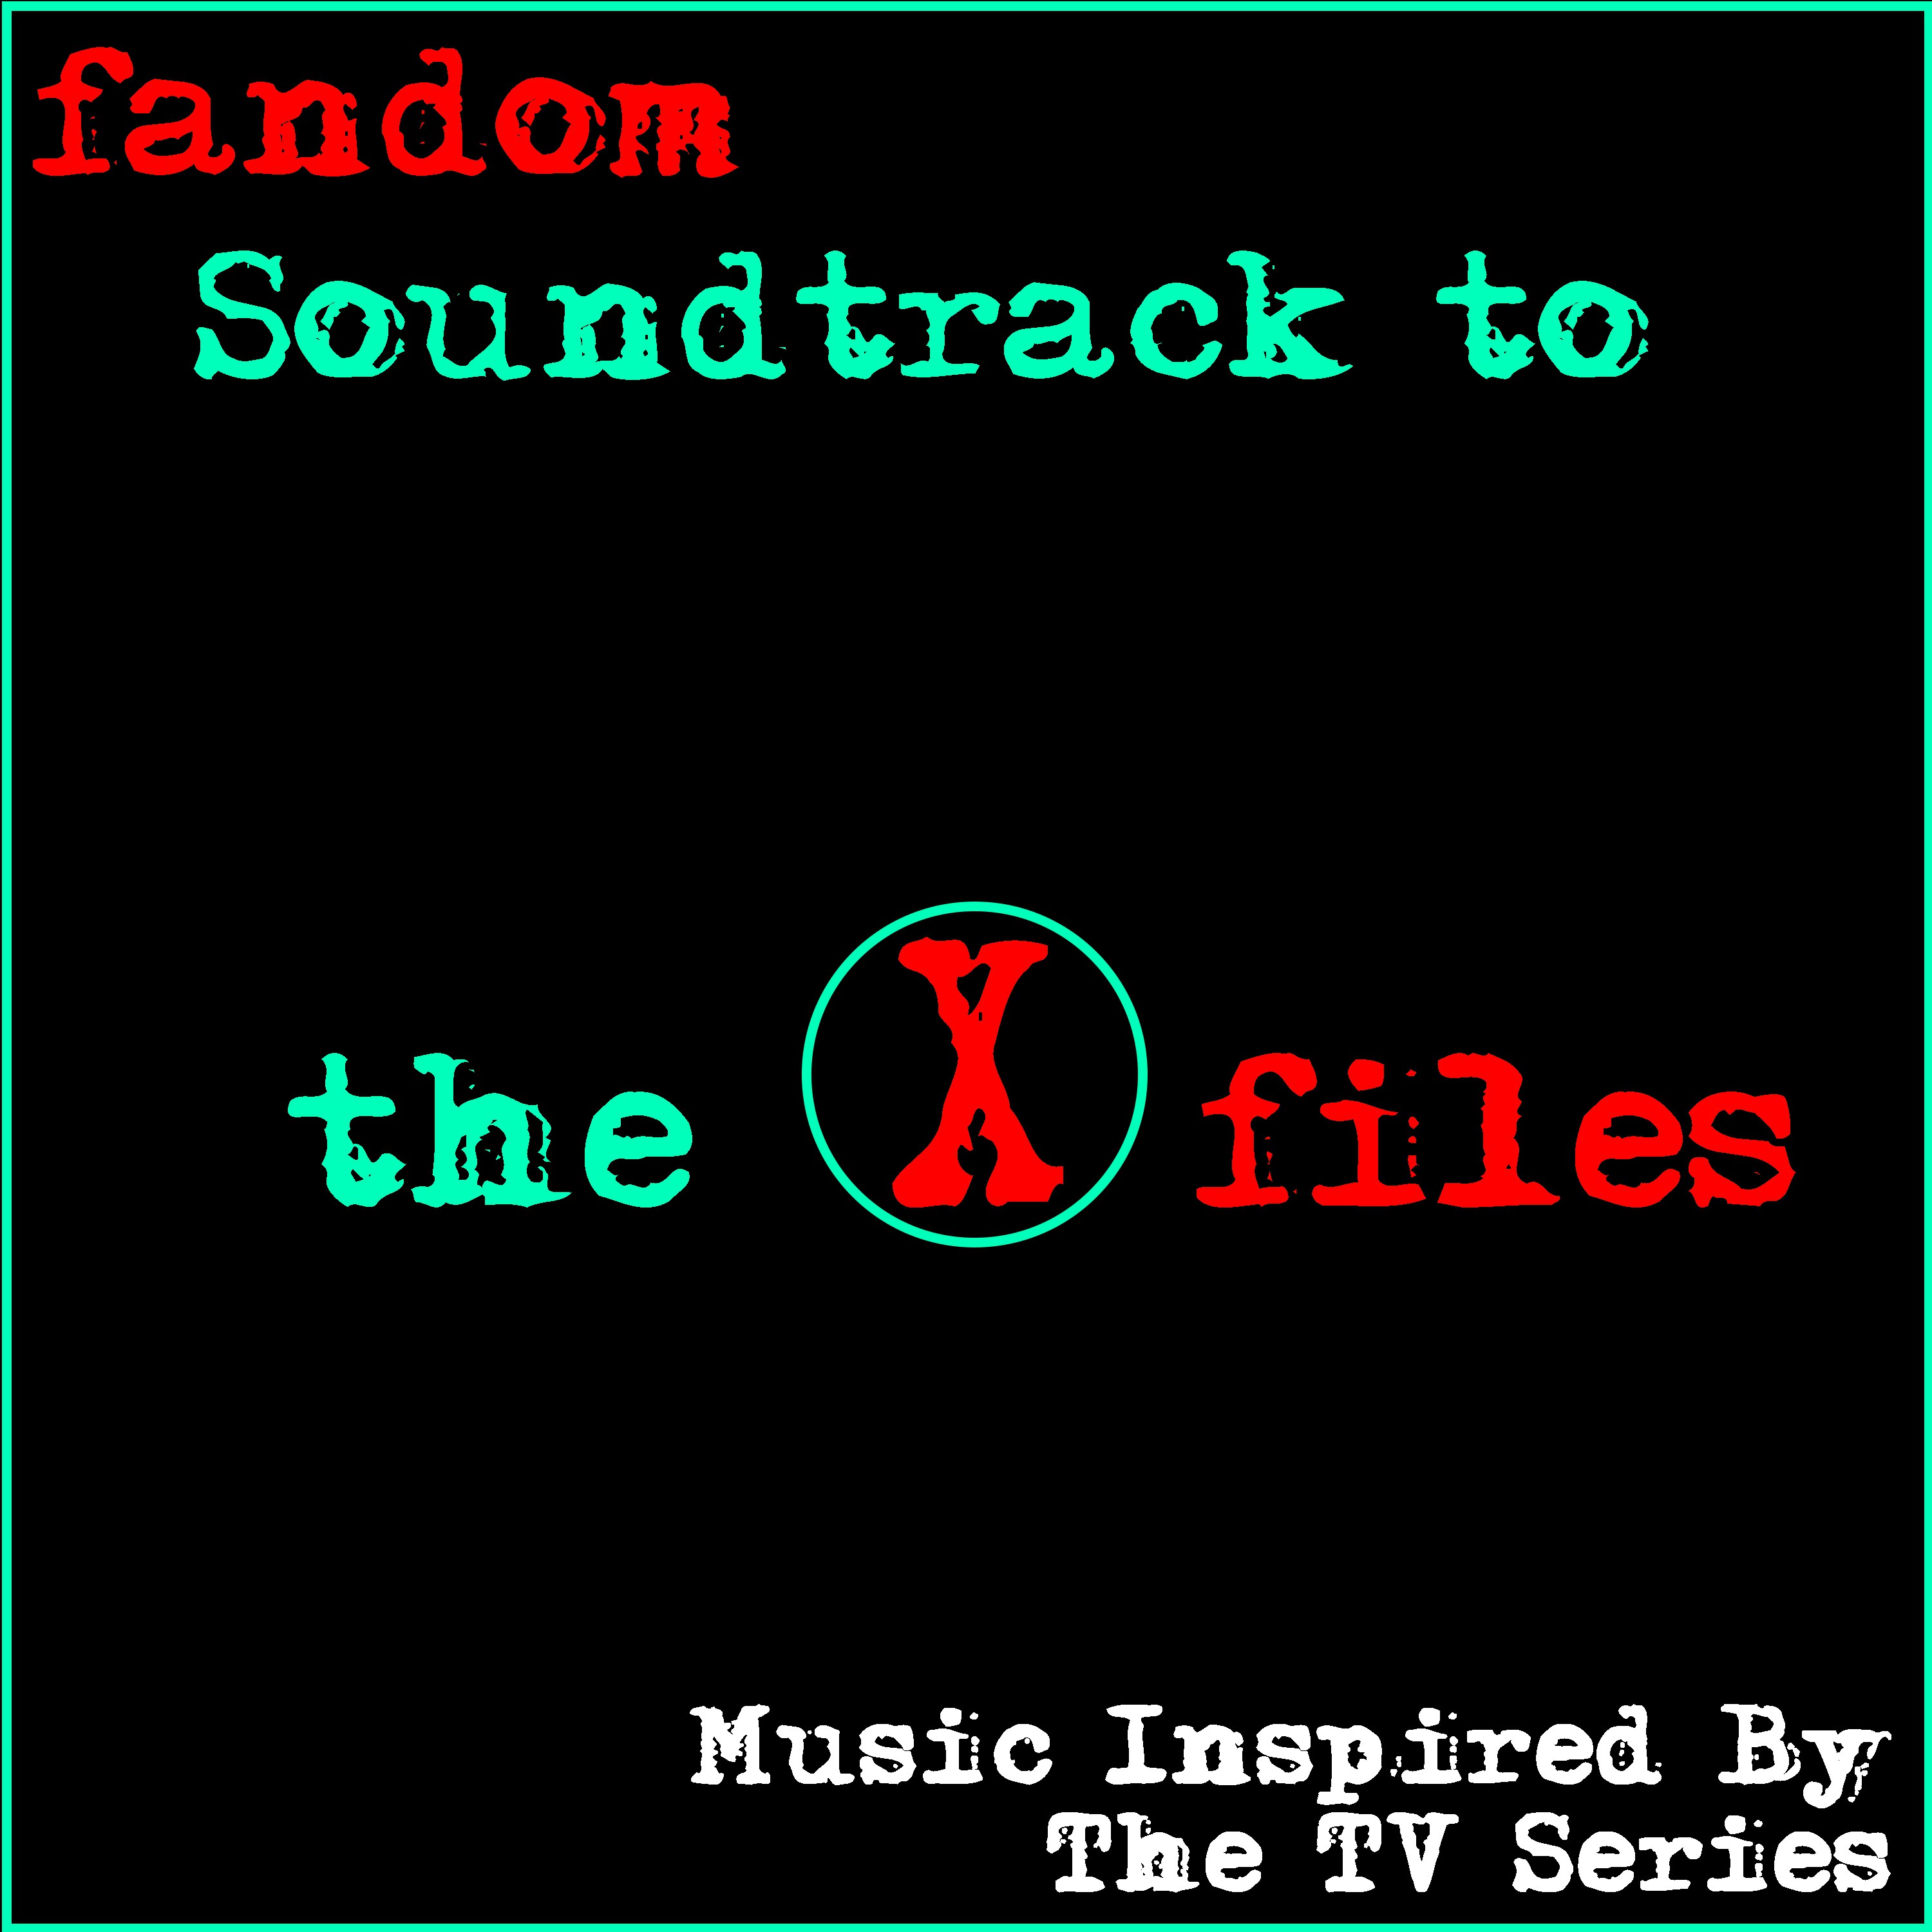 Fandom Soundtrack to the X-Files (Music Inspired by the TV Series)